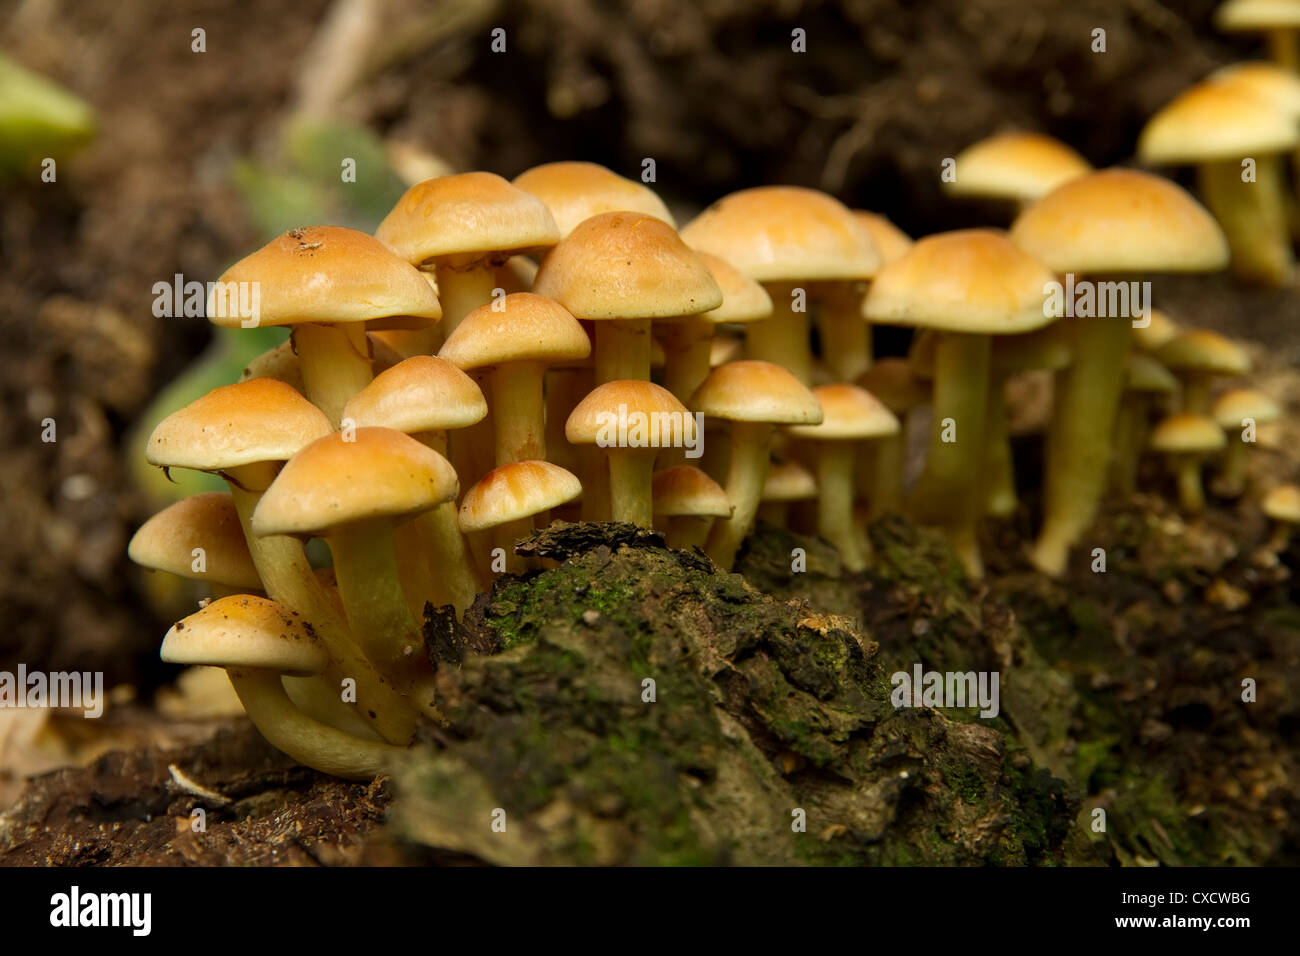 colony of yellow mushrooms on the ground Stock Photo